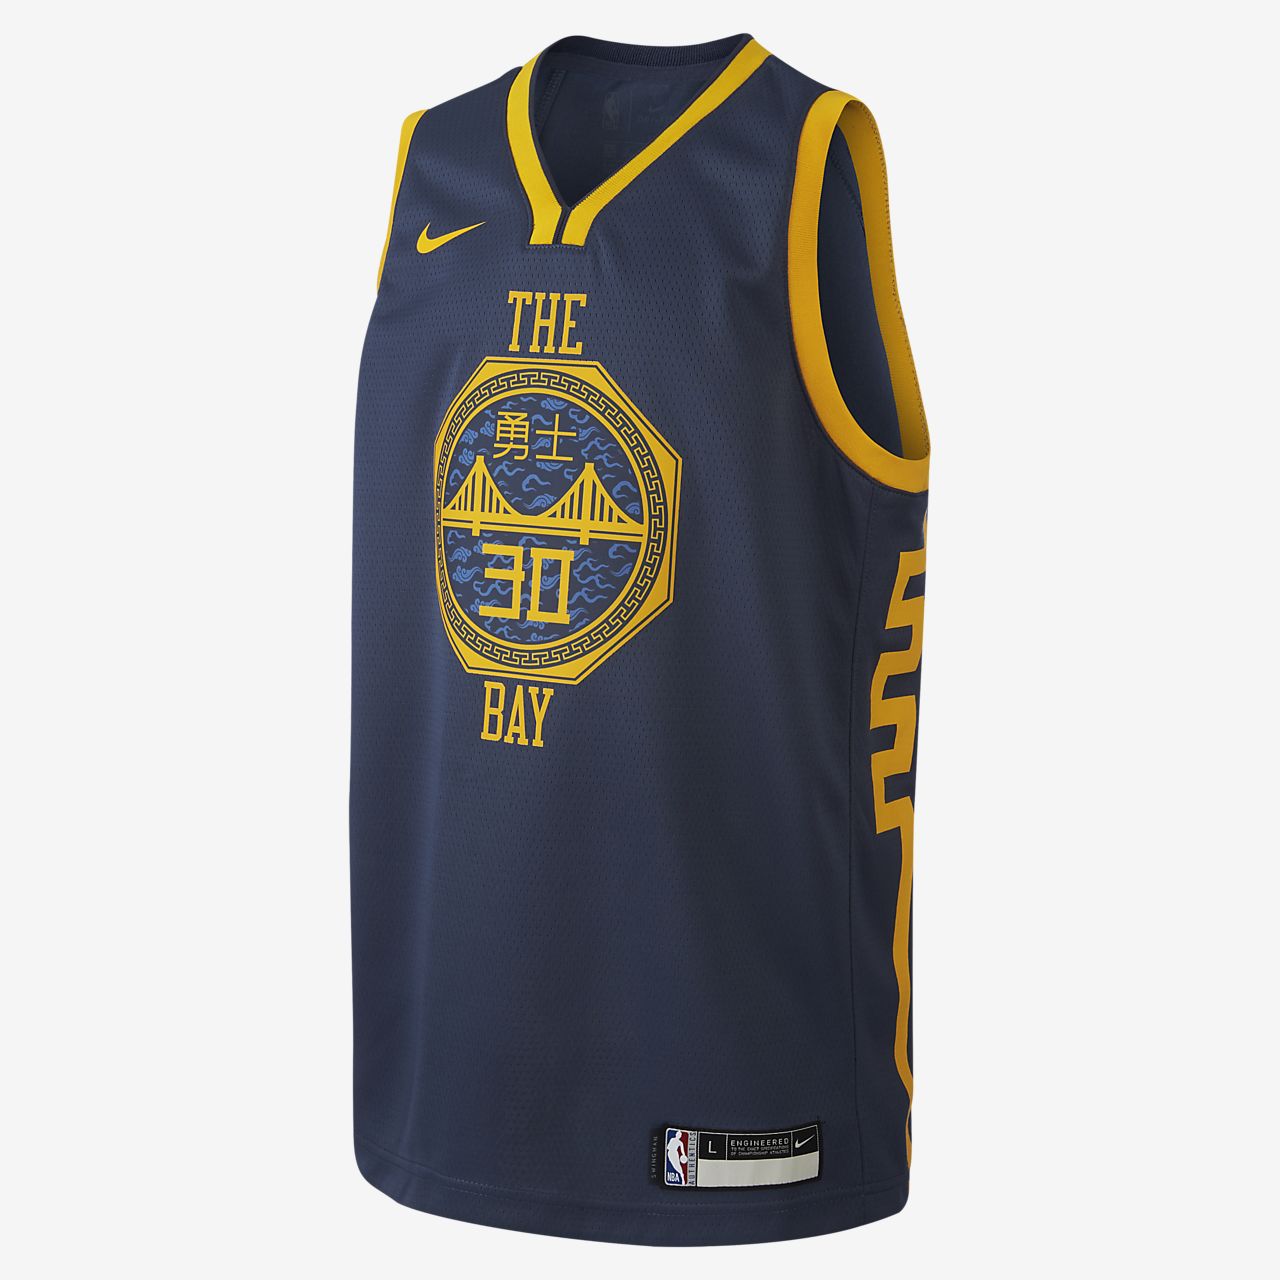 steph curry old jersey